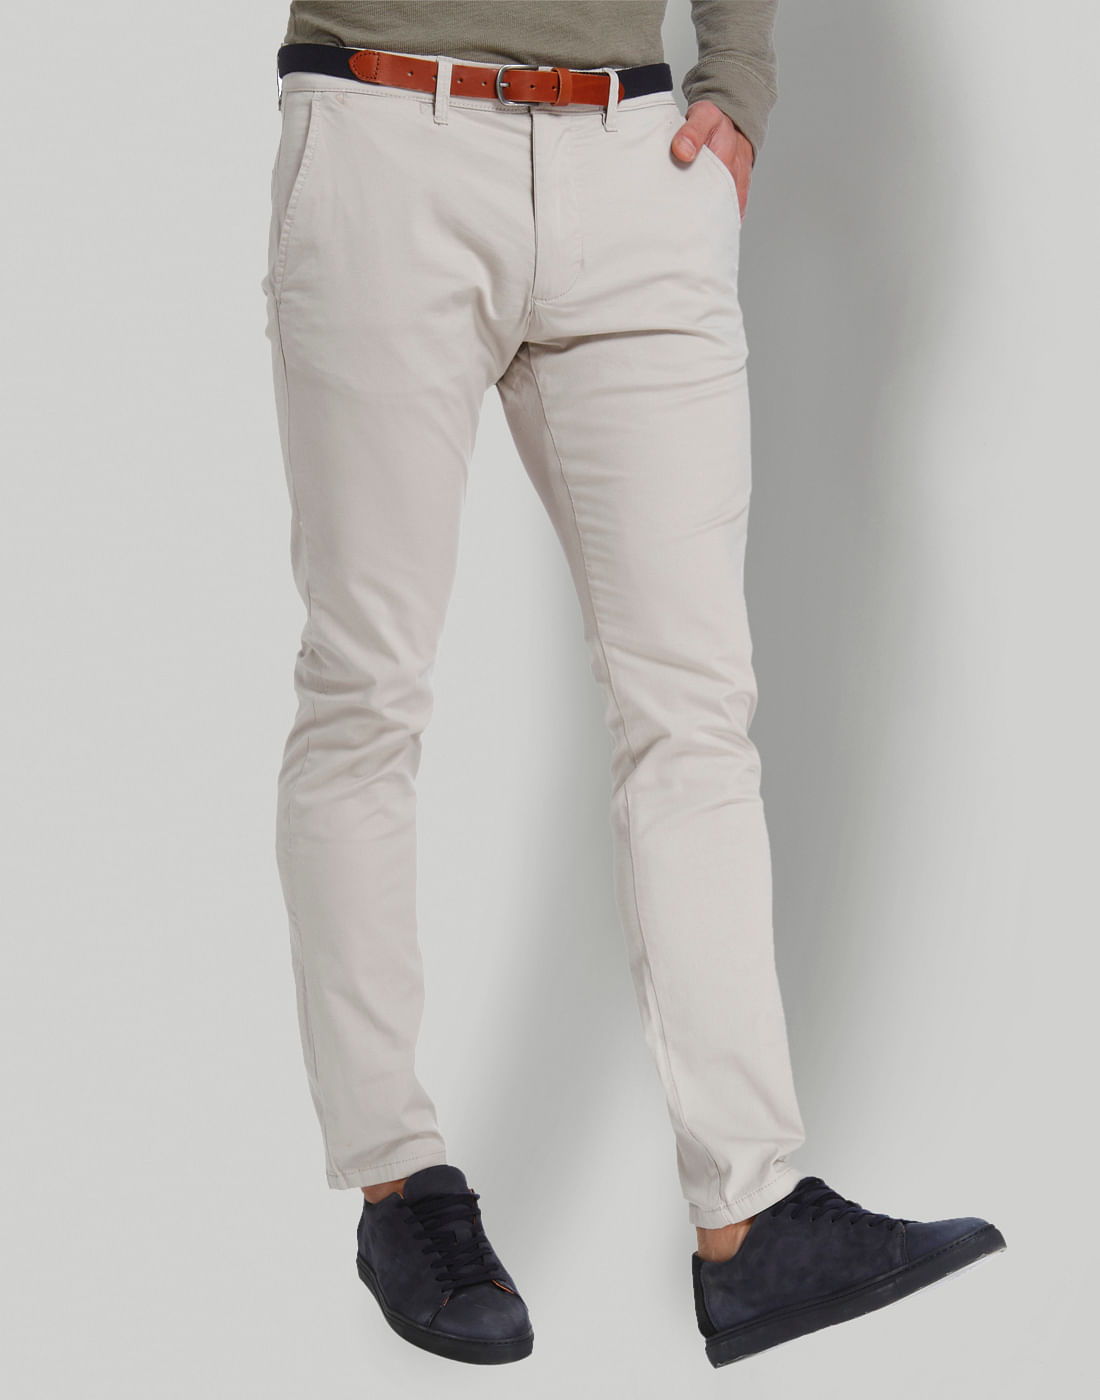 Grey wear with chinos to shoes A Guide